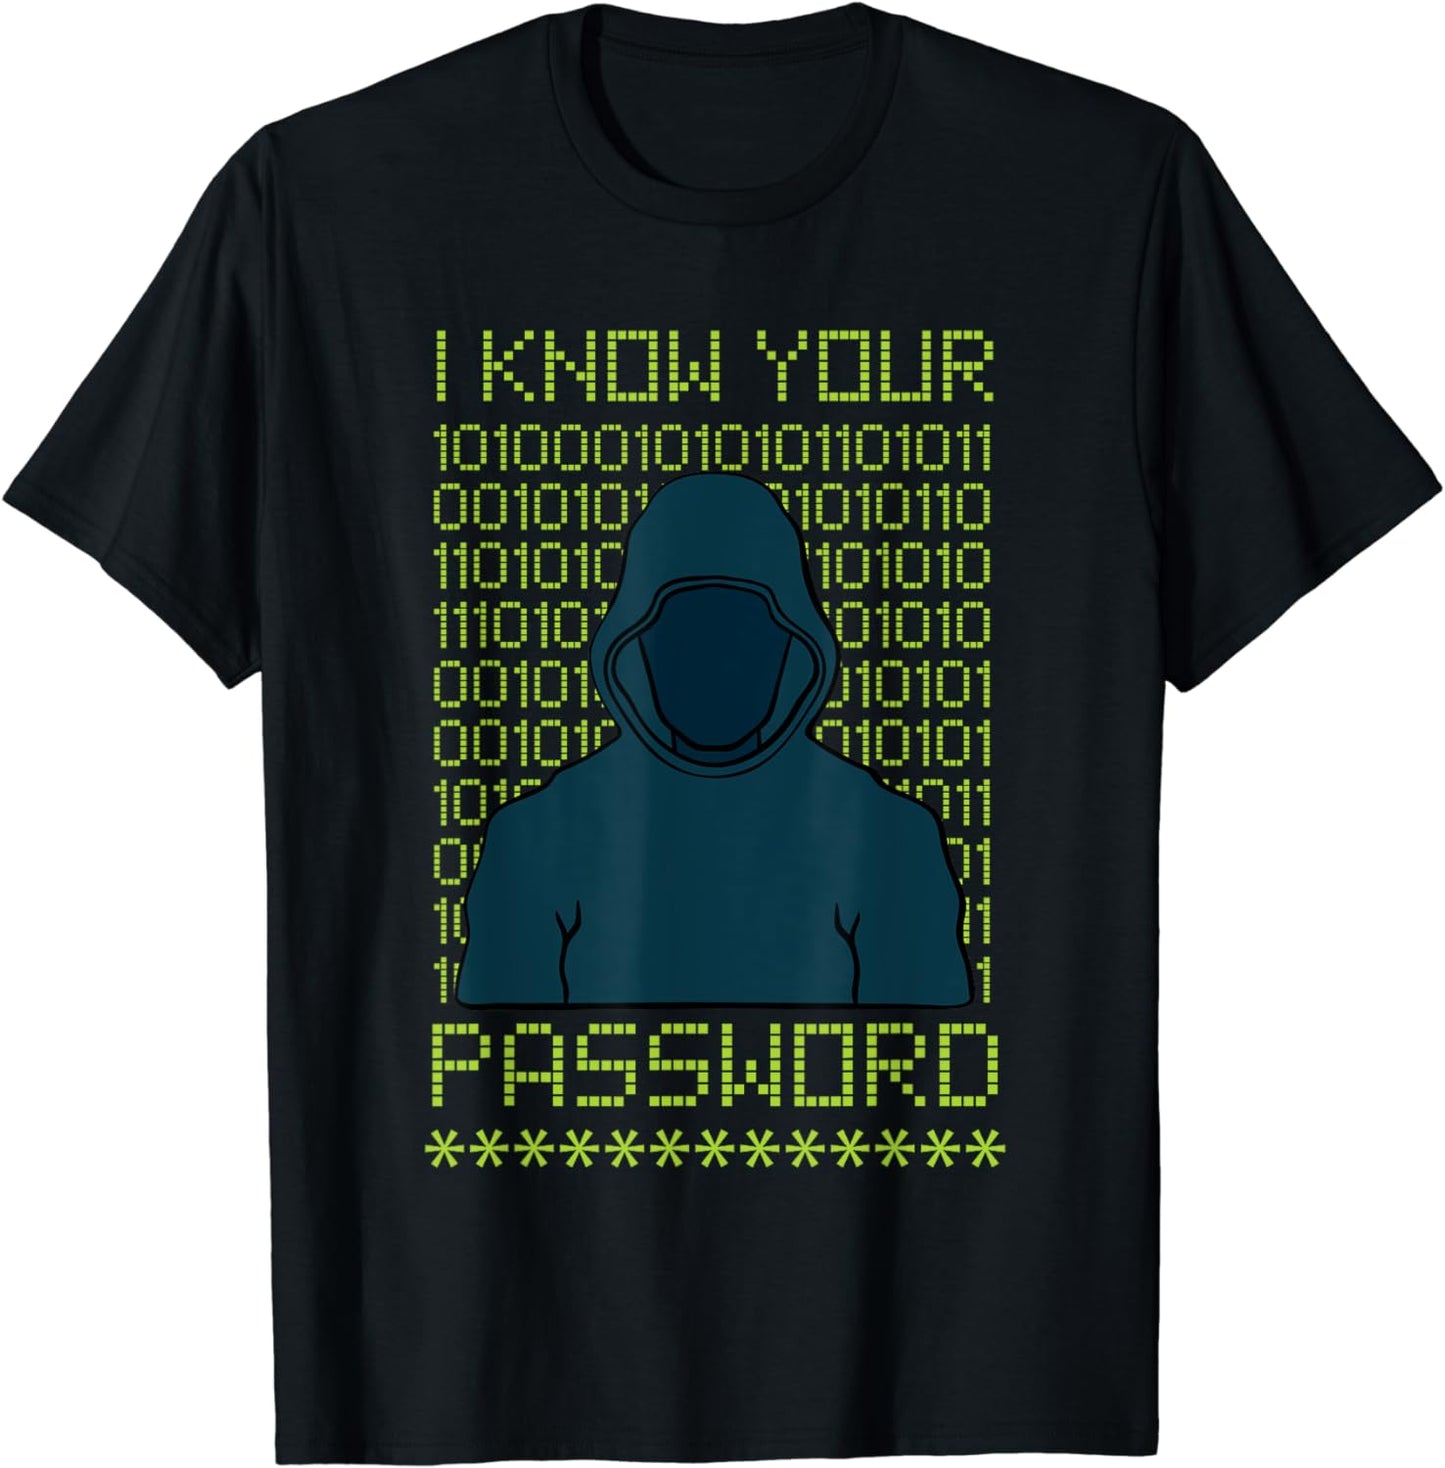 Cybersecurity Gifts - Cyber Security T-Shirt